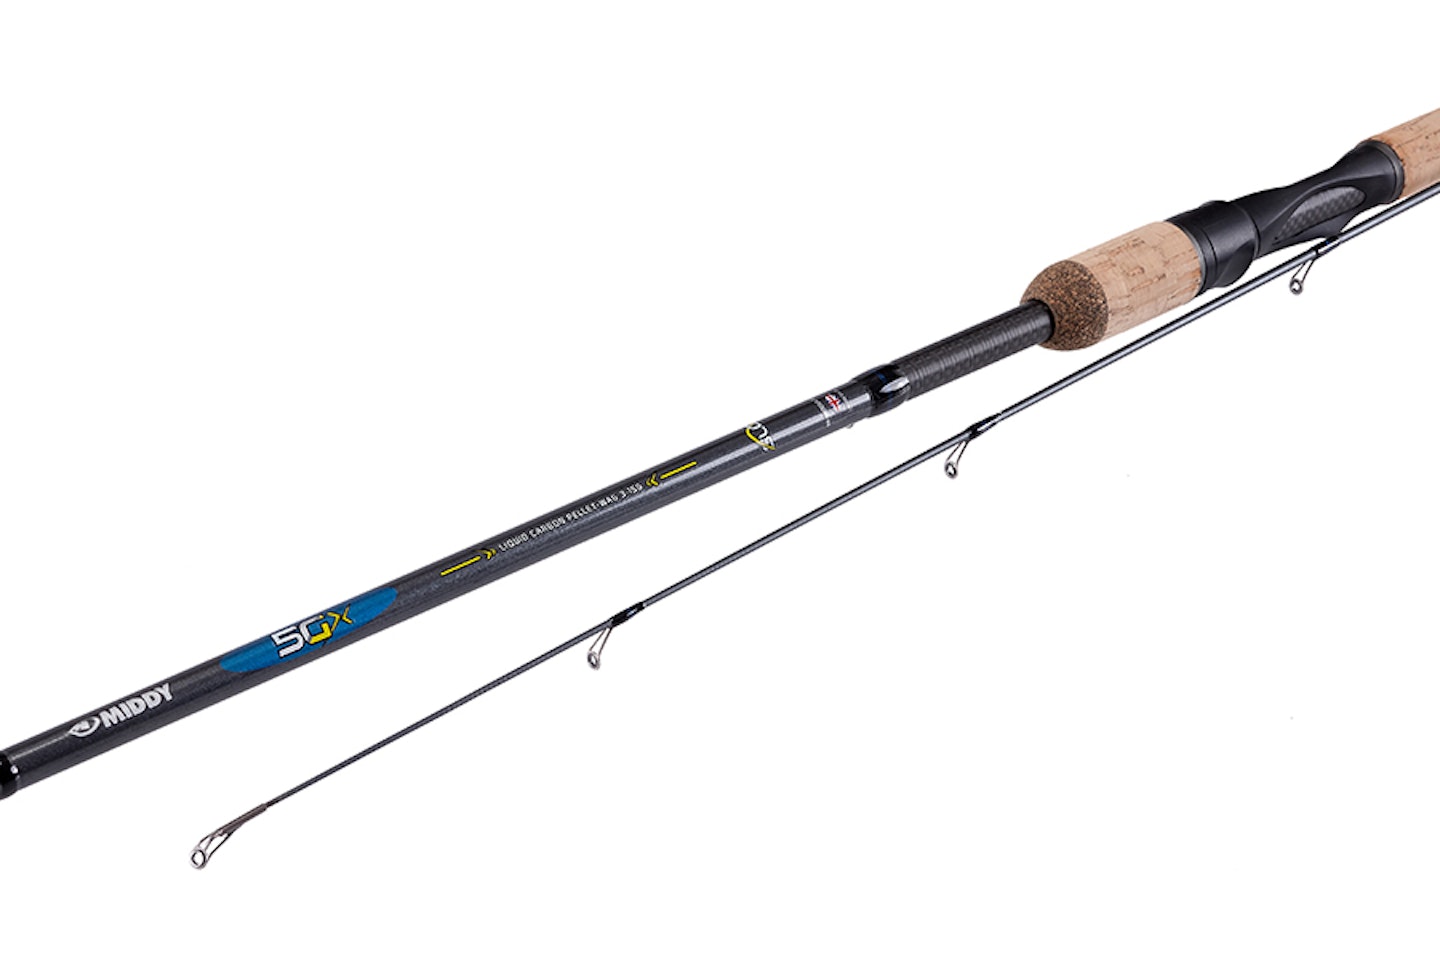 Middy 5G Pellet Waggler rod